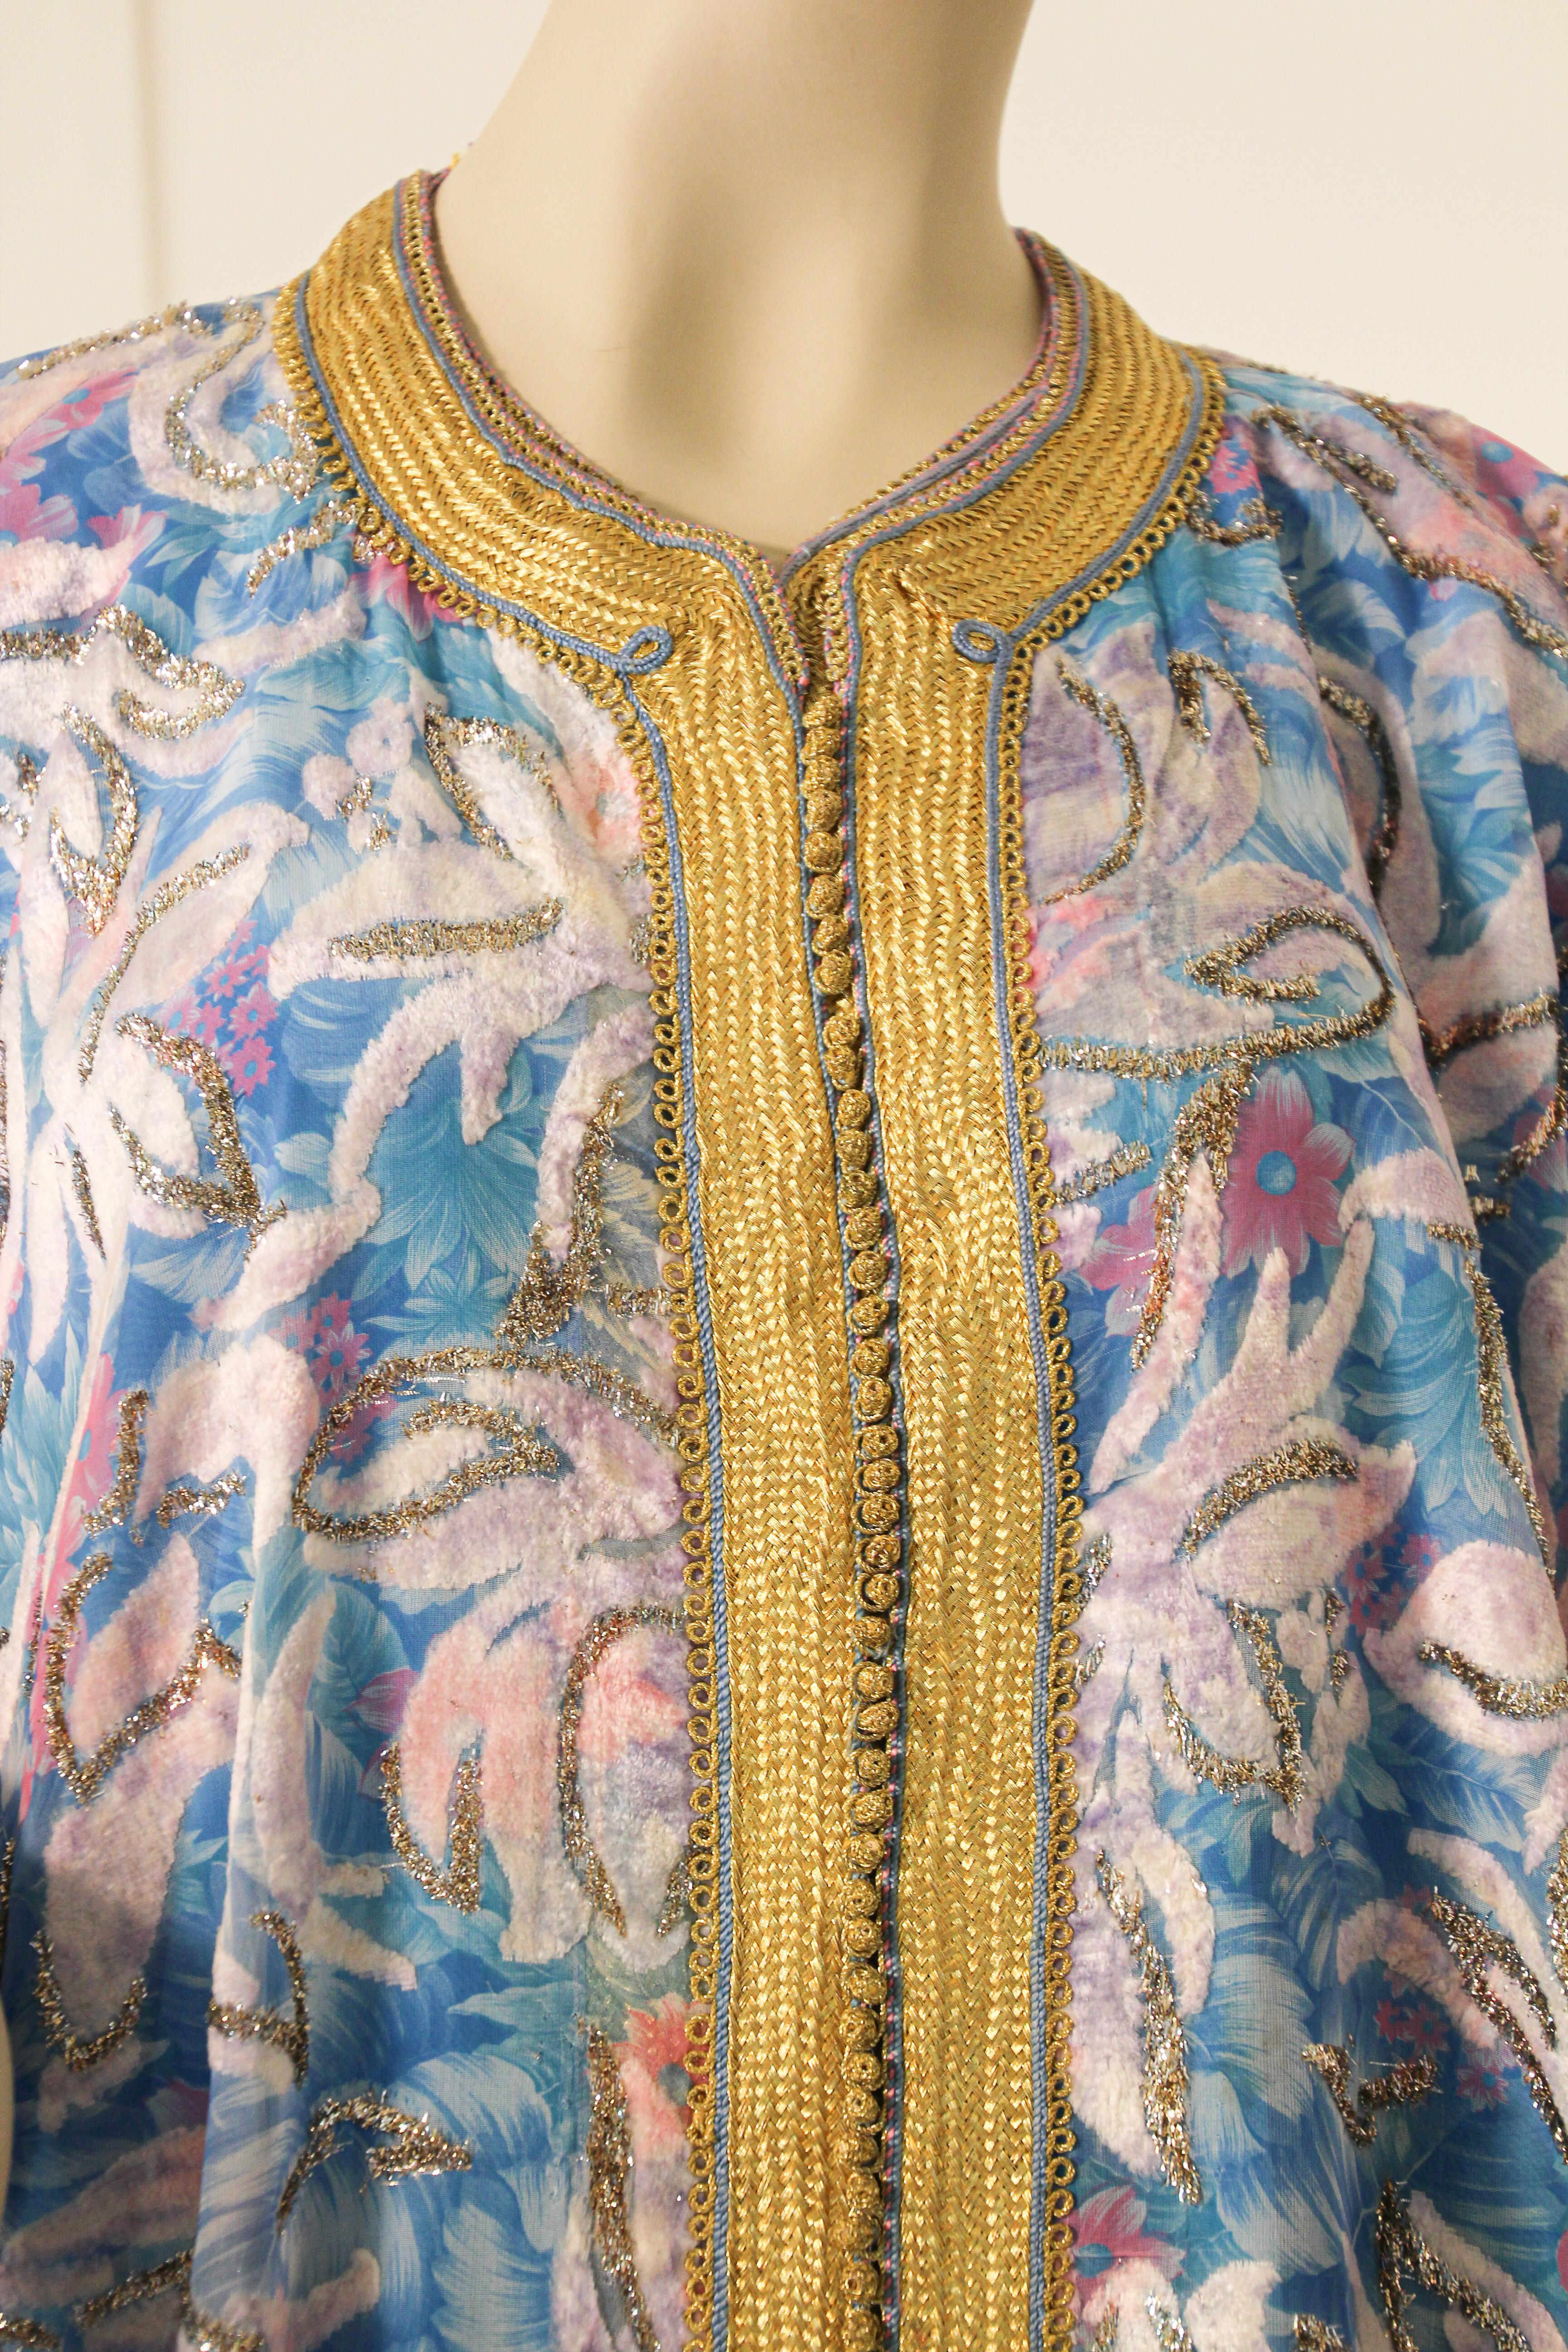 Women's Moroccan Kaftan in Turquoise and Gold Floral Brocade Metallic Lame For Sale